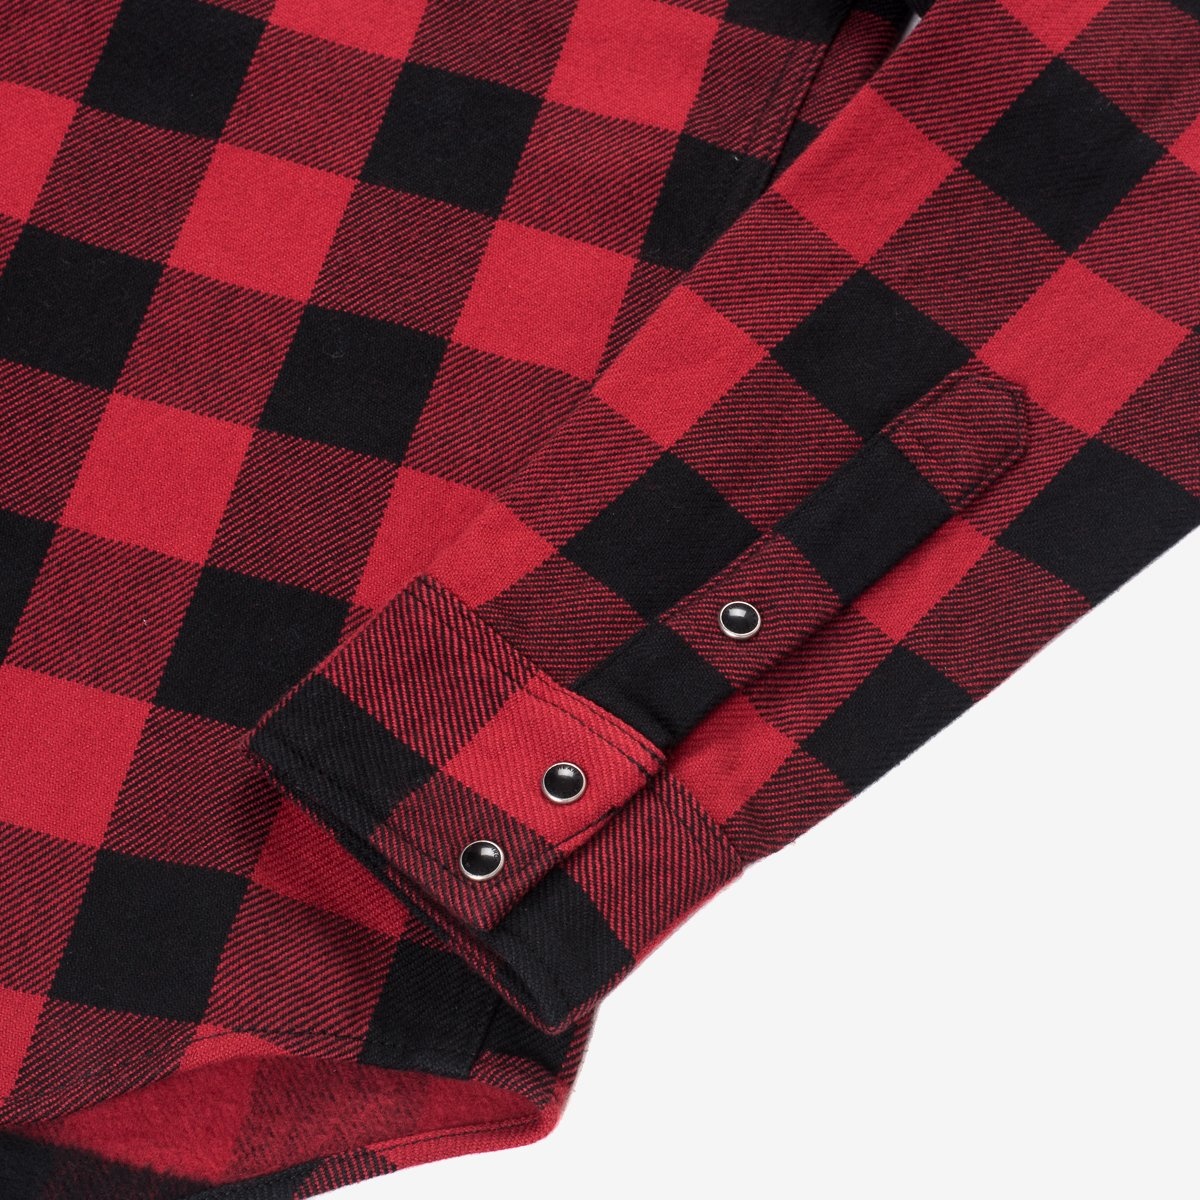 IHSH-232-RED Ultra Heavy Flannel Buffalo Check Western Shirt - Red/Black - 6